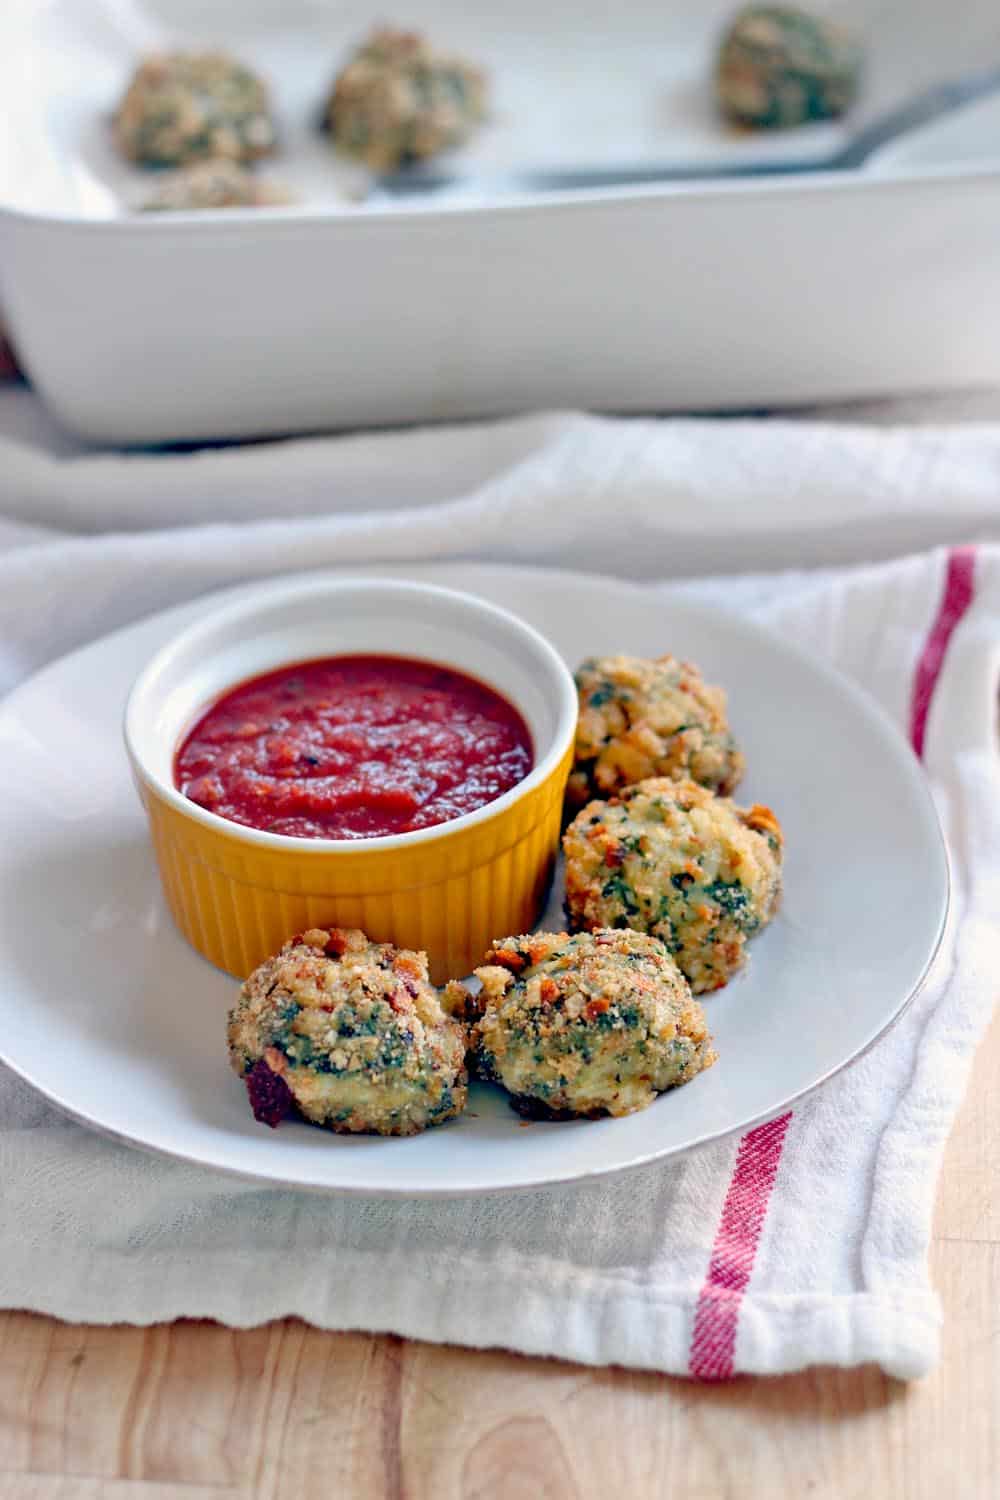 These Oven-Baked Spinach and Barley Arancini are kid friendly, healthy, delicious, and super easy to make! Plus, you can freeze them for later. If you're looking for a healthy alternative to frozen chicken nuggets, this is it!